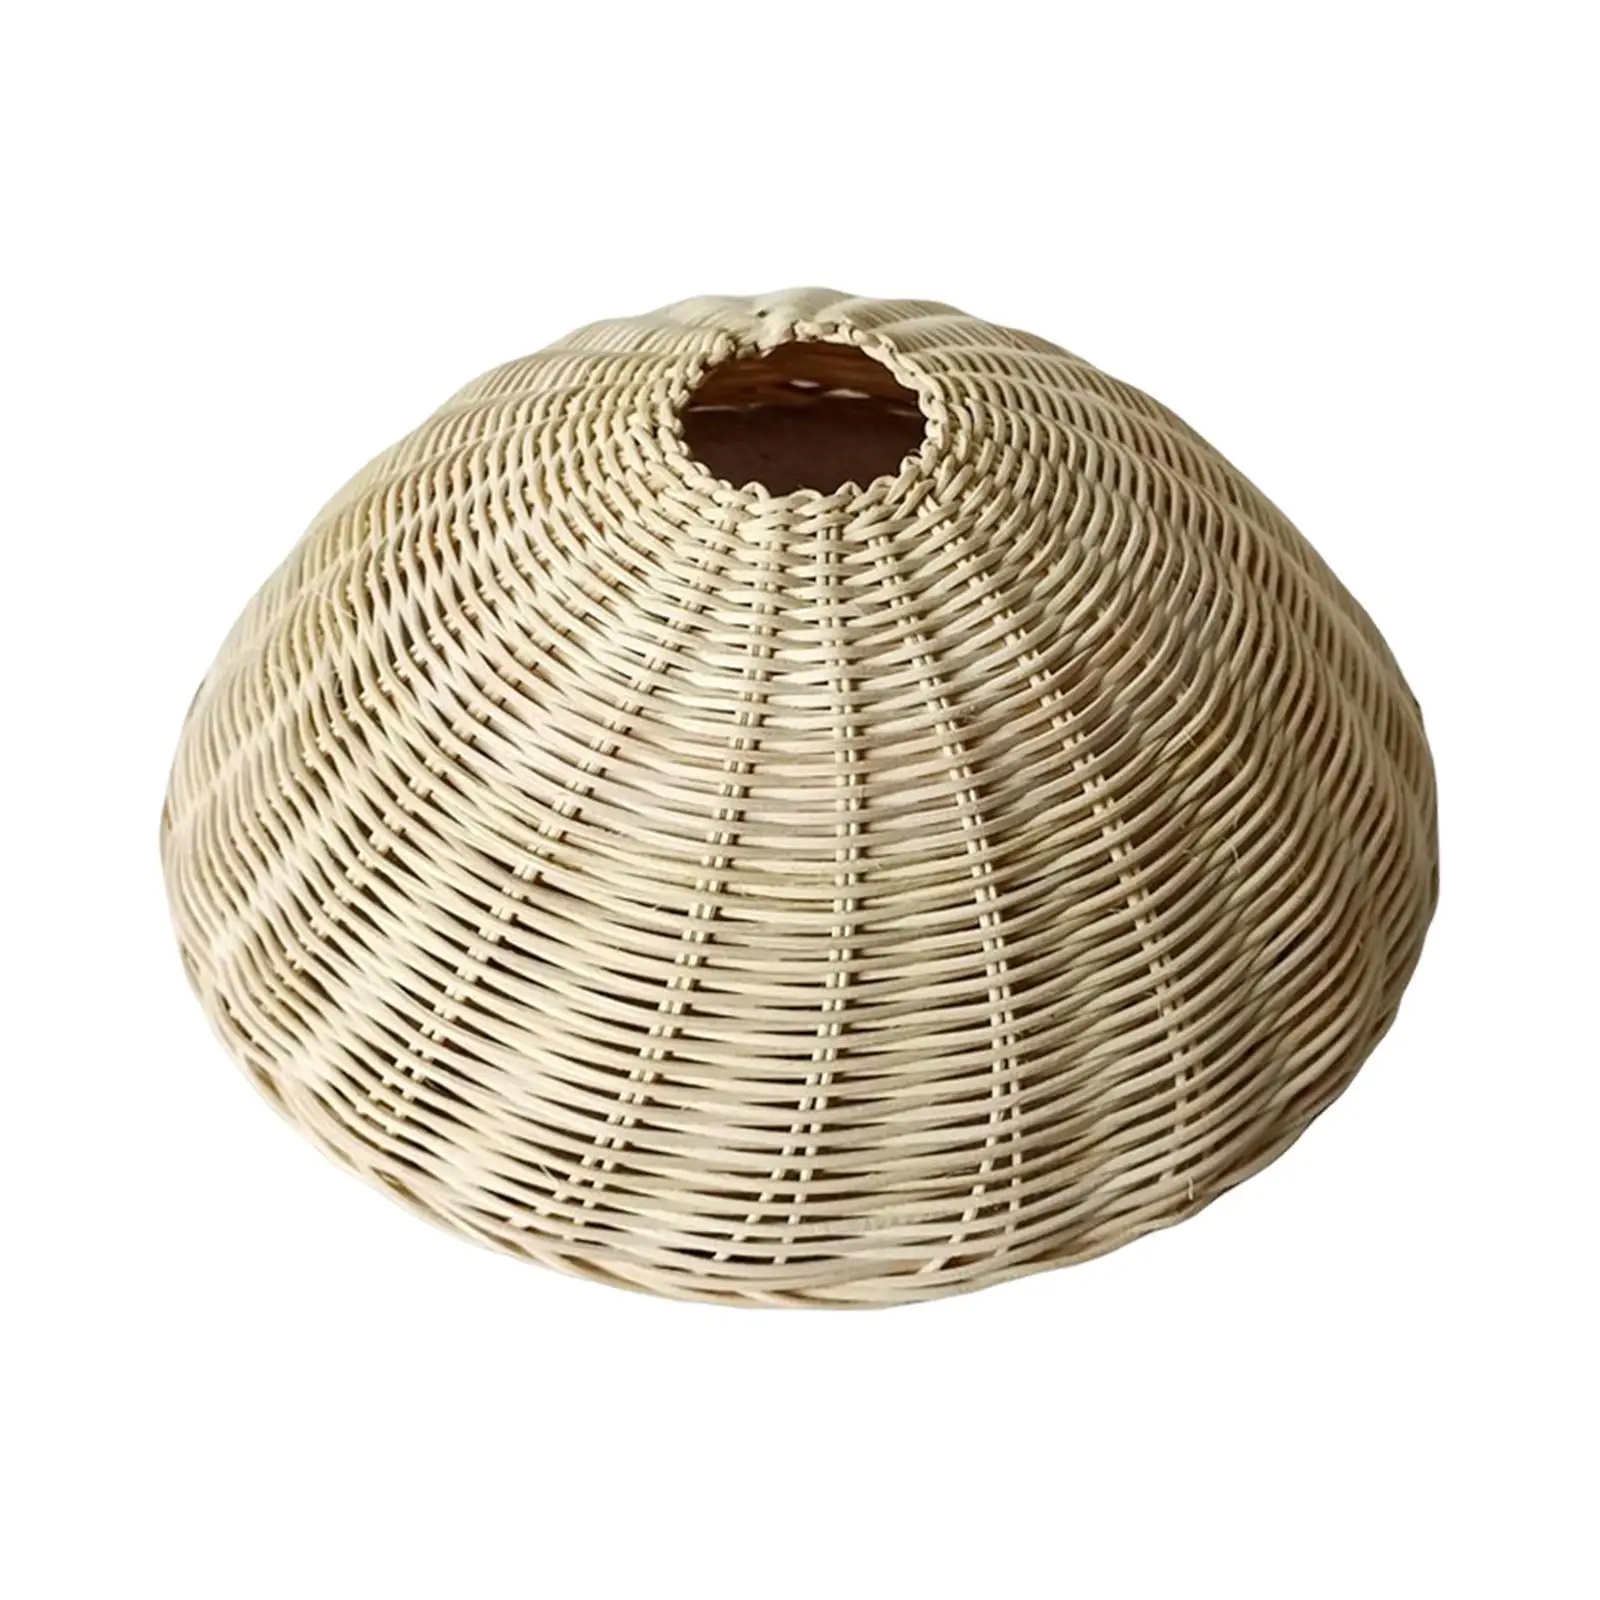 Bamboo Lamp Shade Home Decor Replacement Lamp Cage for Tea houses living Room